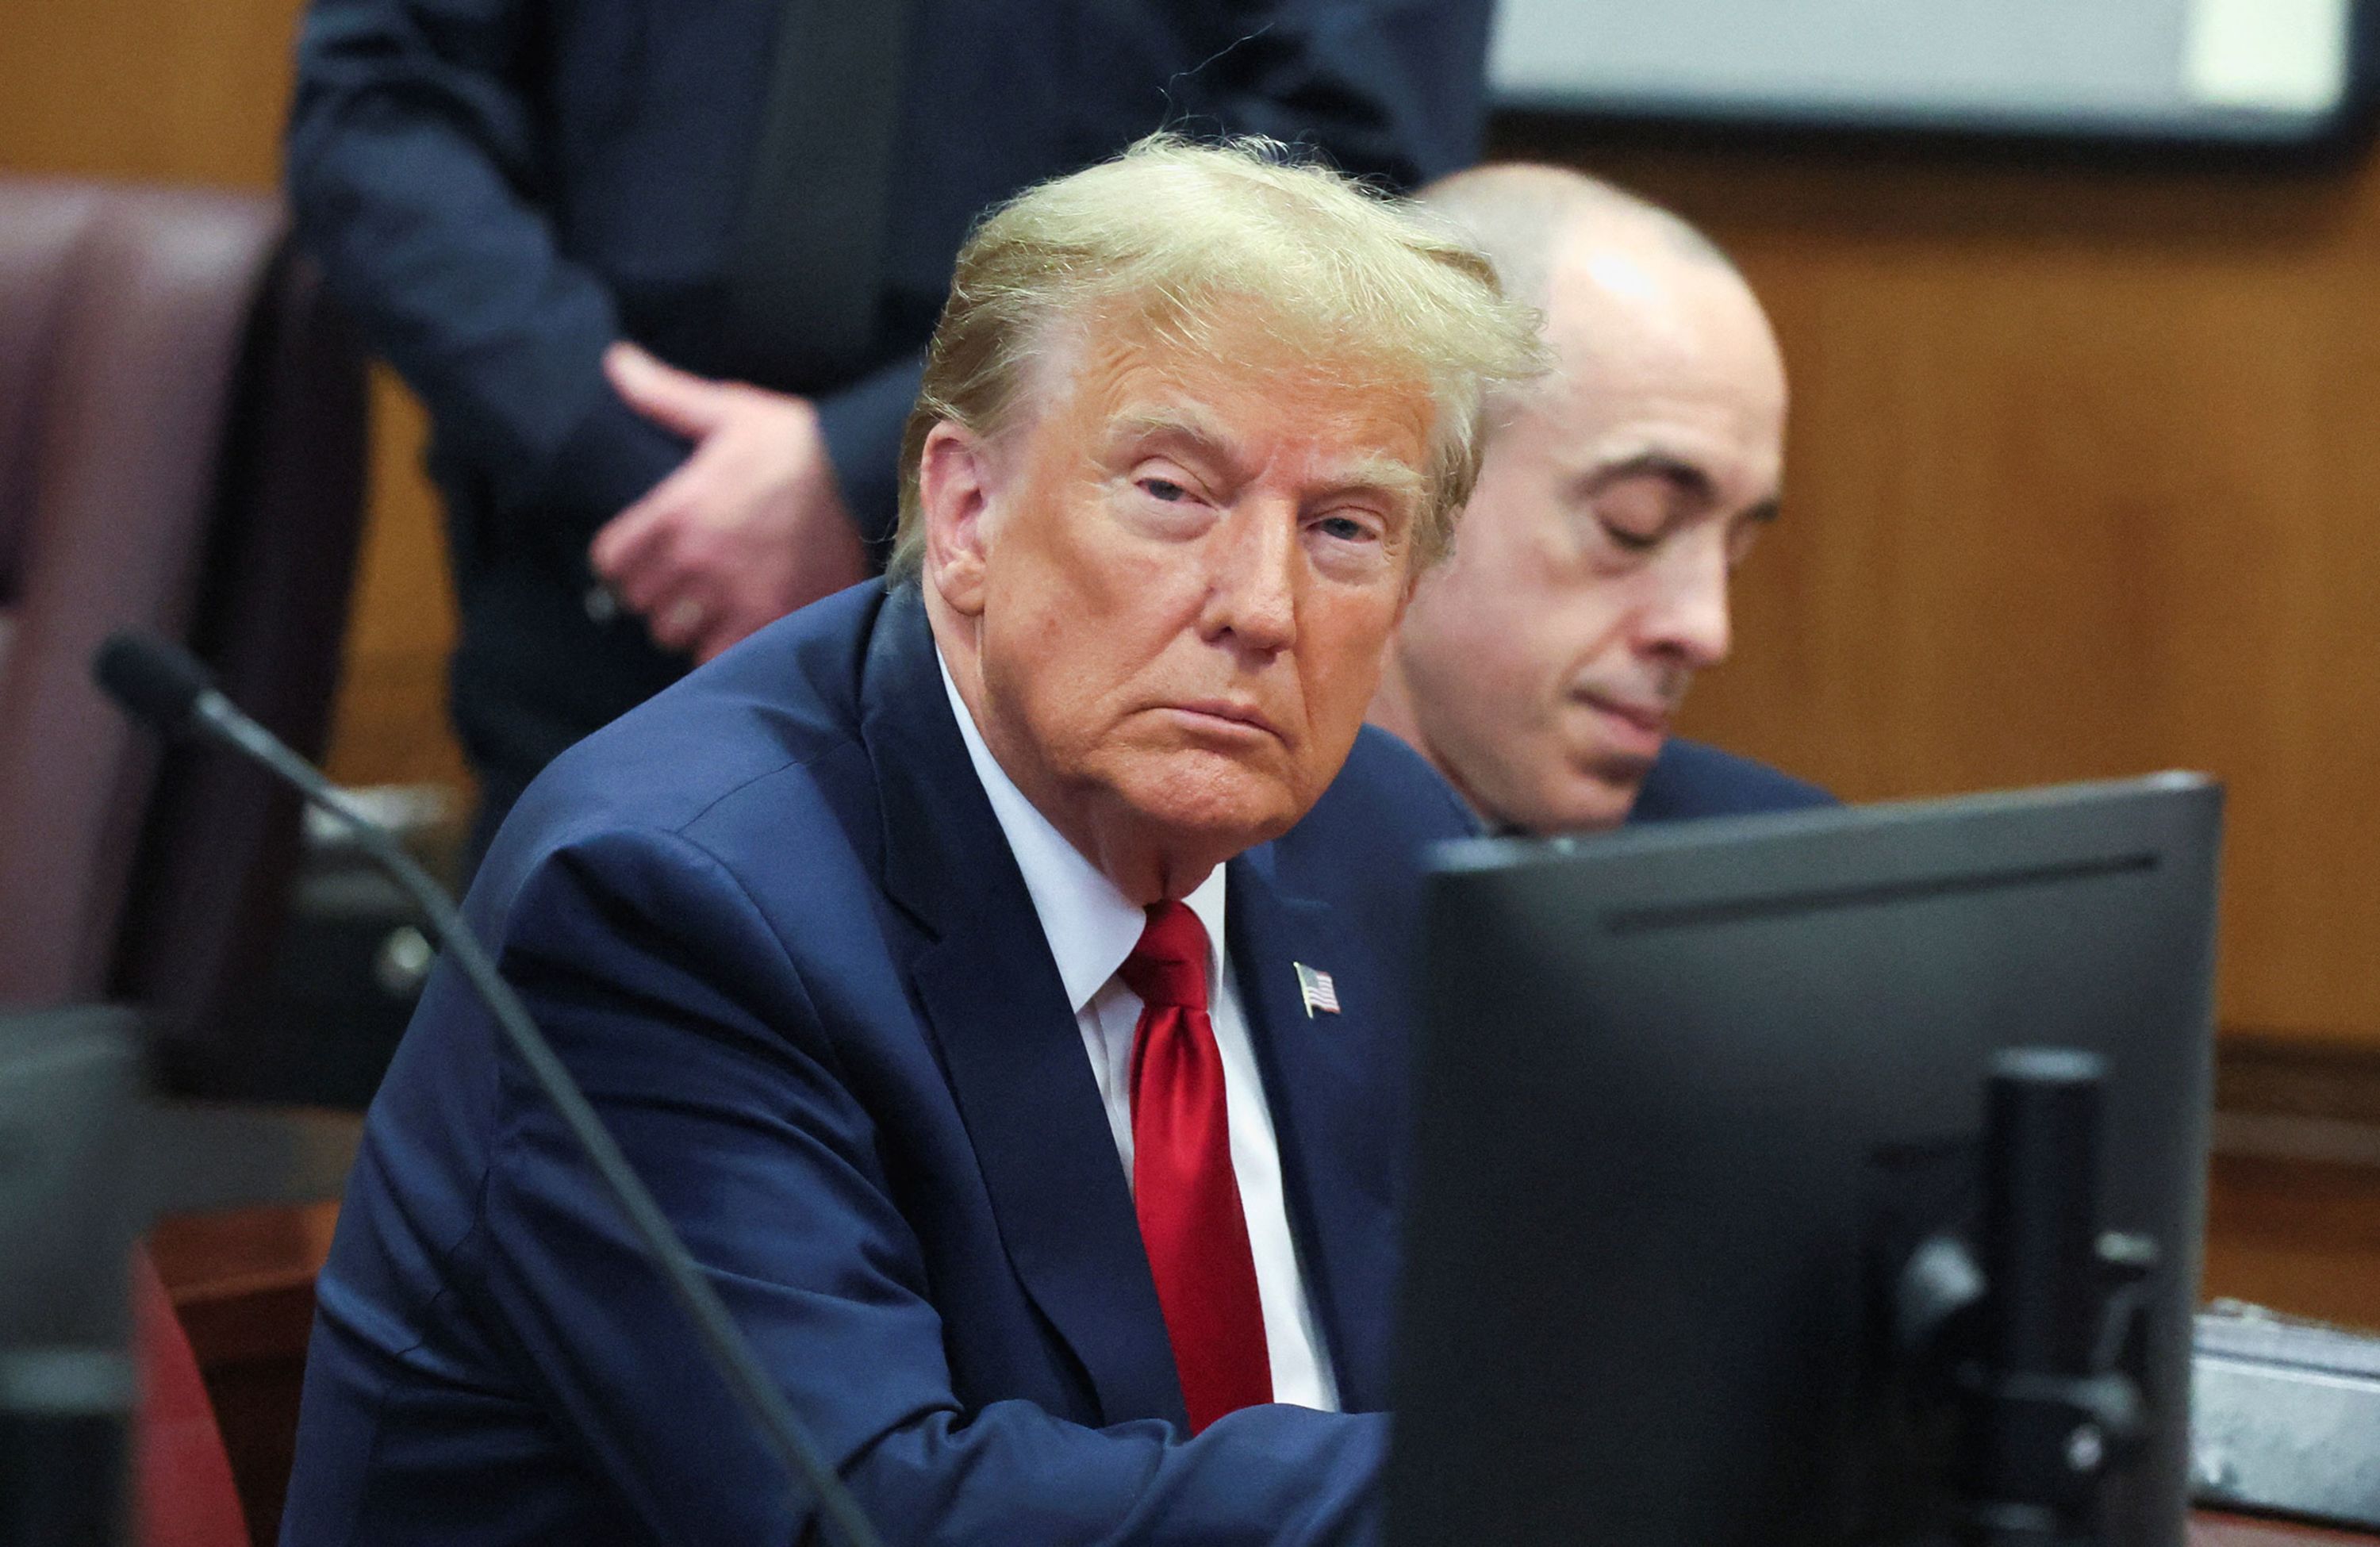 Former President Donald Trump attends a hearing in New York on Thursday, February 15.